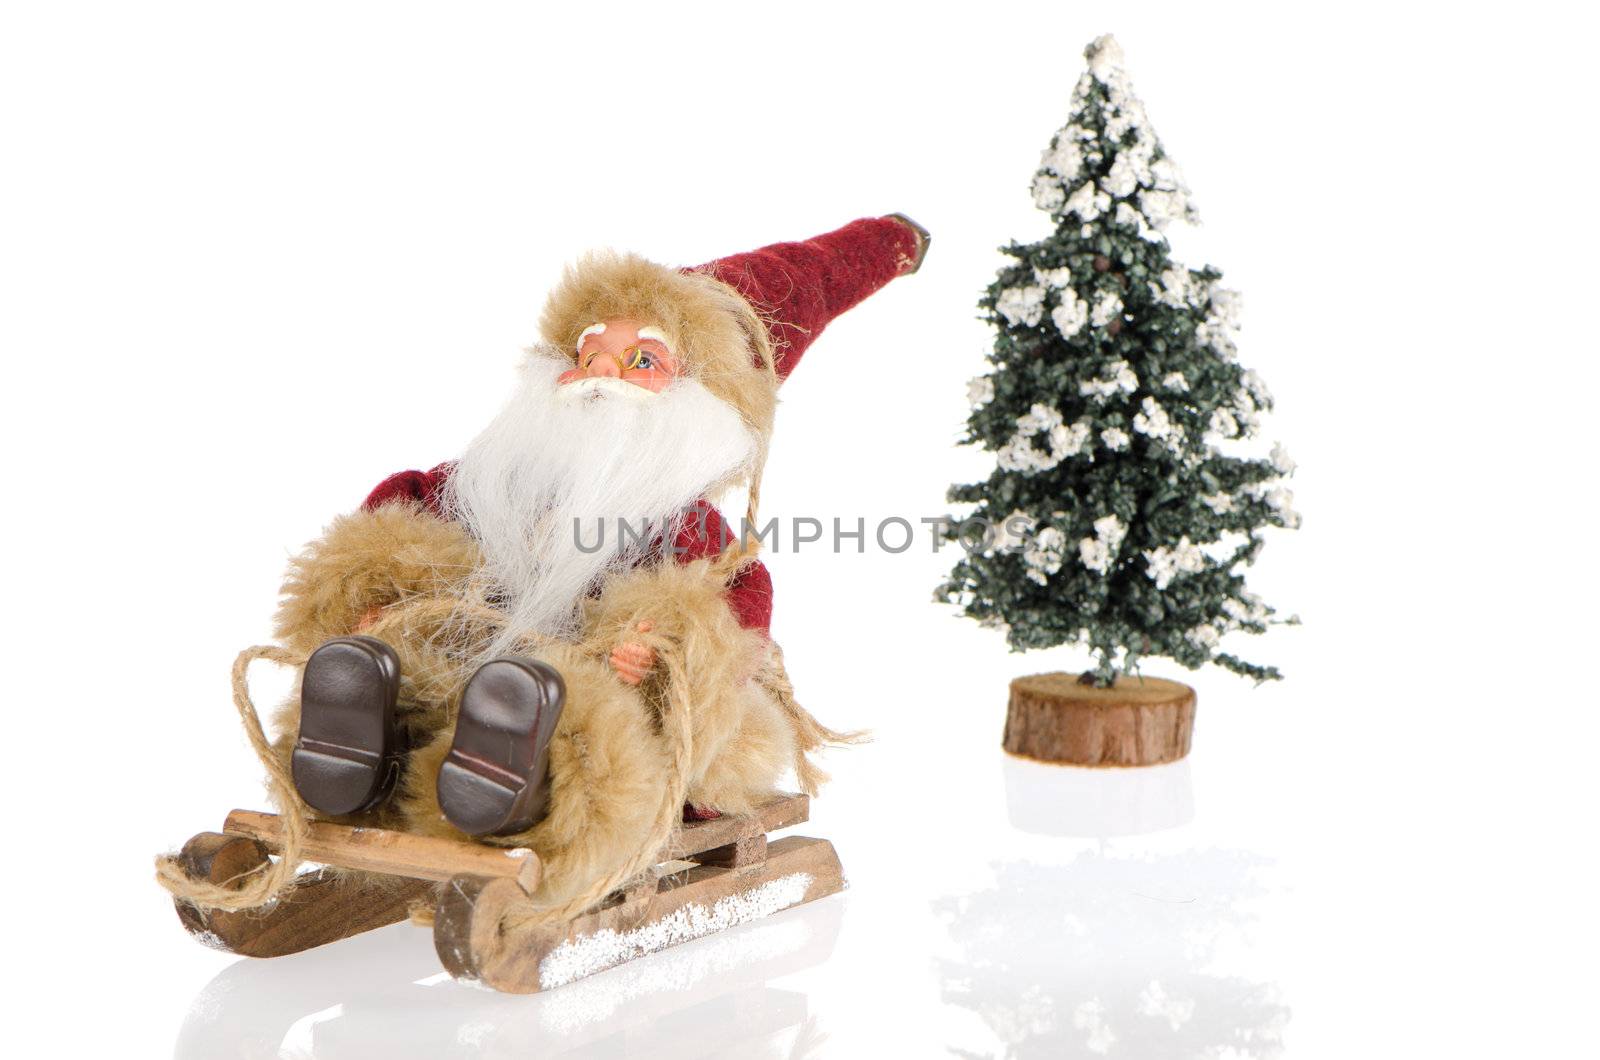 Miniature of Santa Claus on sleigh and a pine tree with snow, on white reflective background.